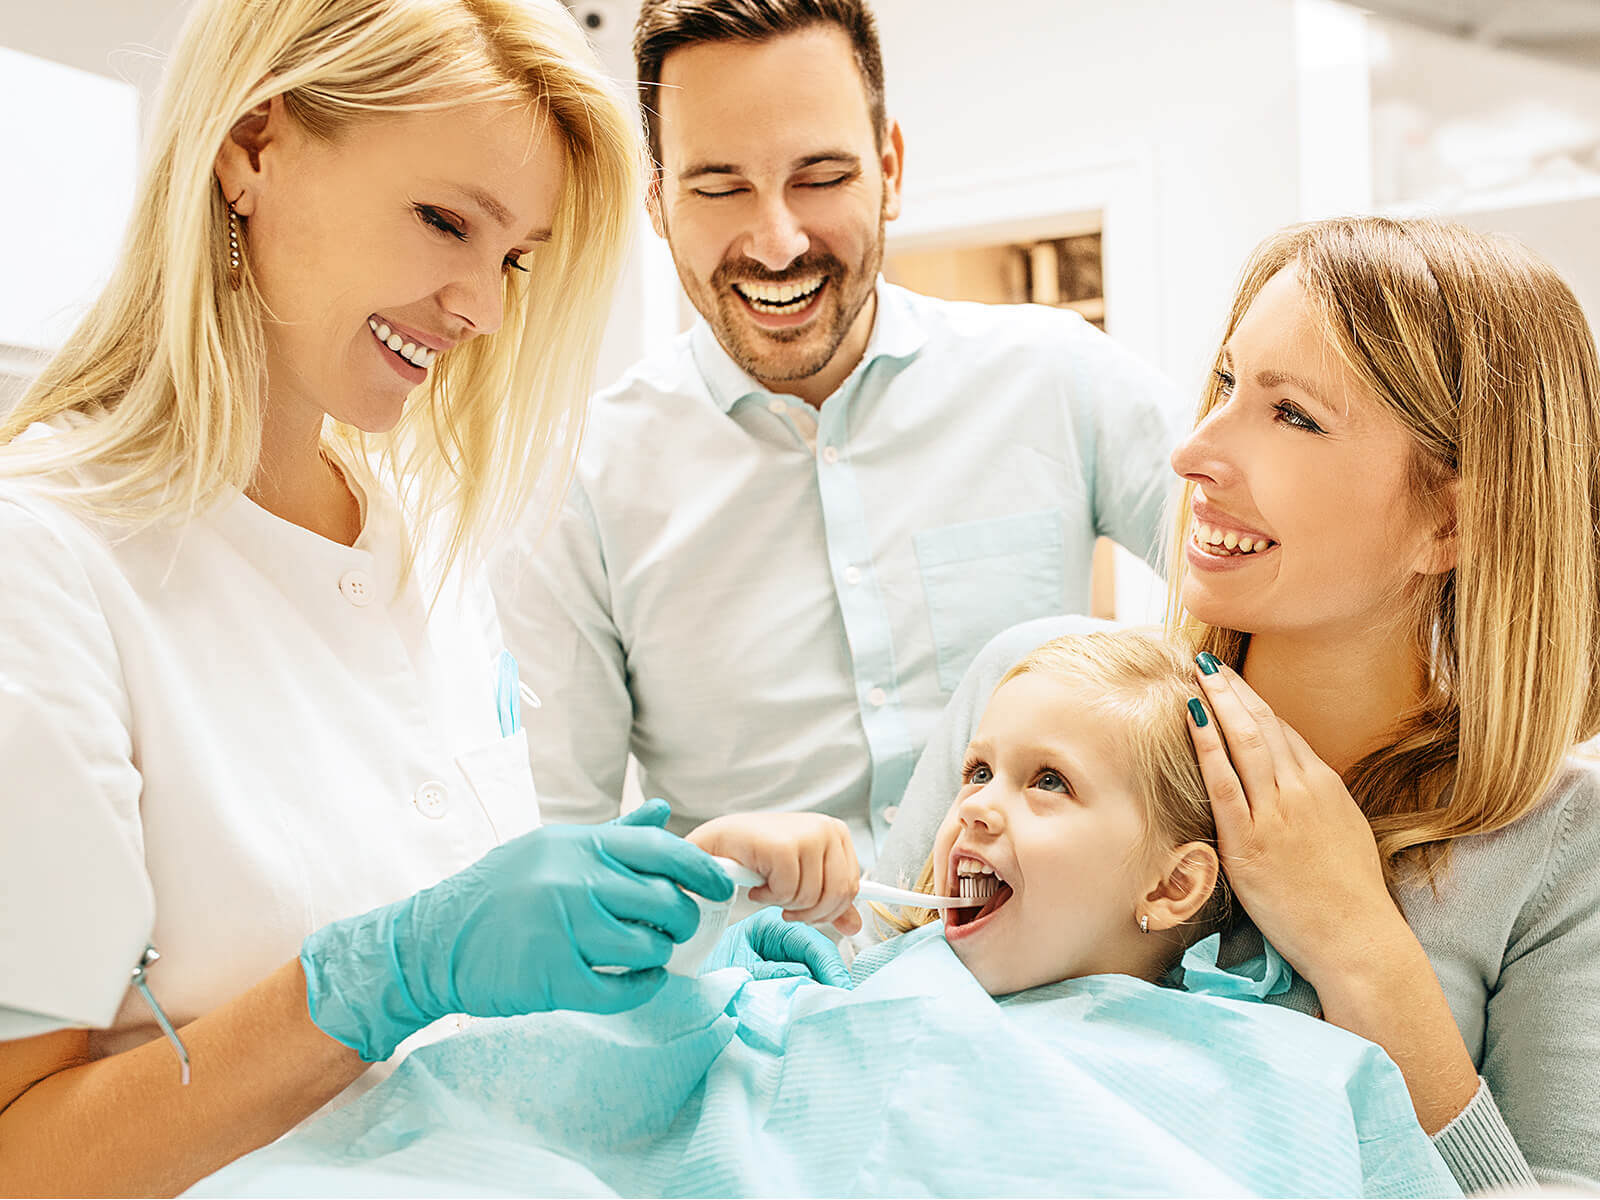 How To Choose The Right Dentist For Your Family’s Oral Health?